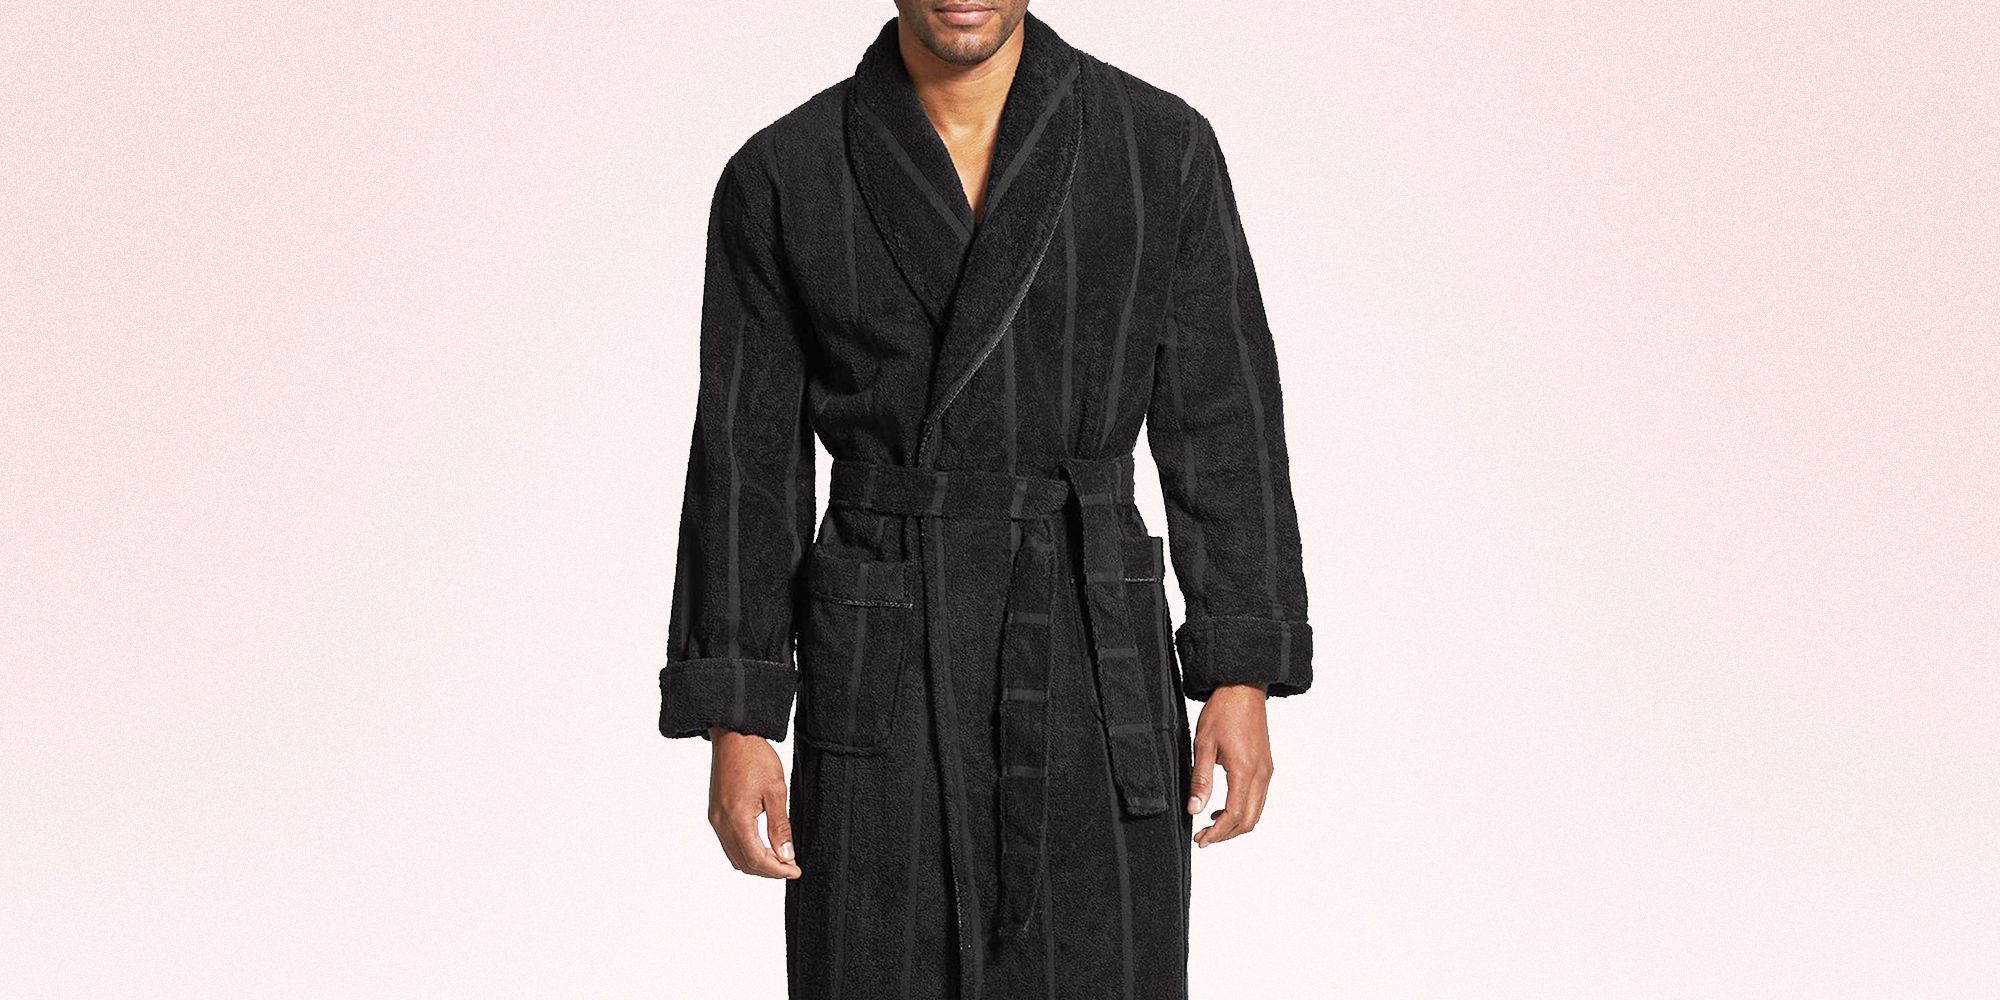 Strong Souls Mens Fleece Dressing Gown Soft Warm Bath Robe Housecoat Gifts for Men 